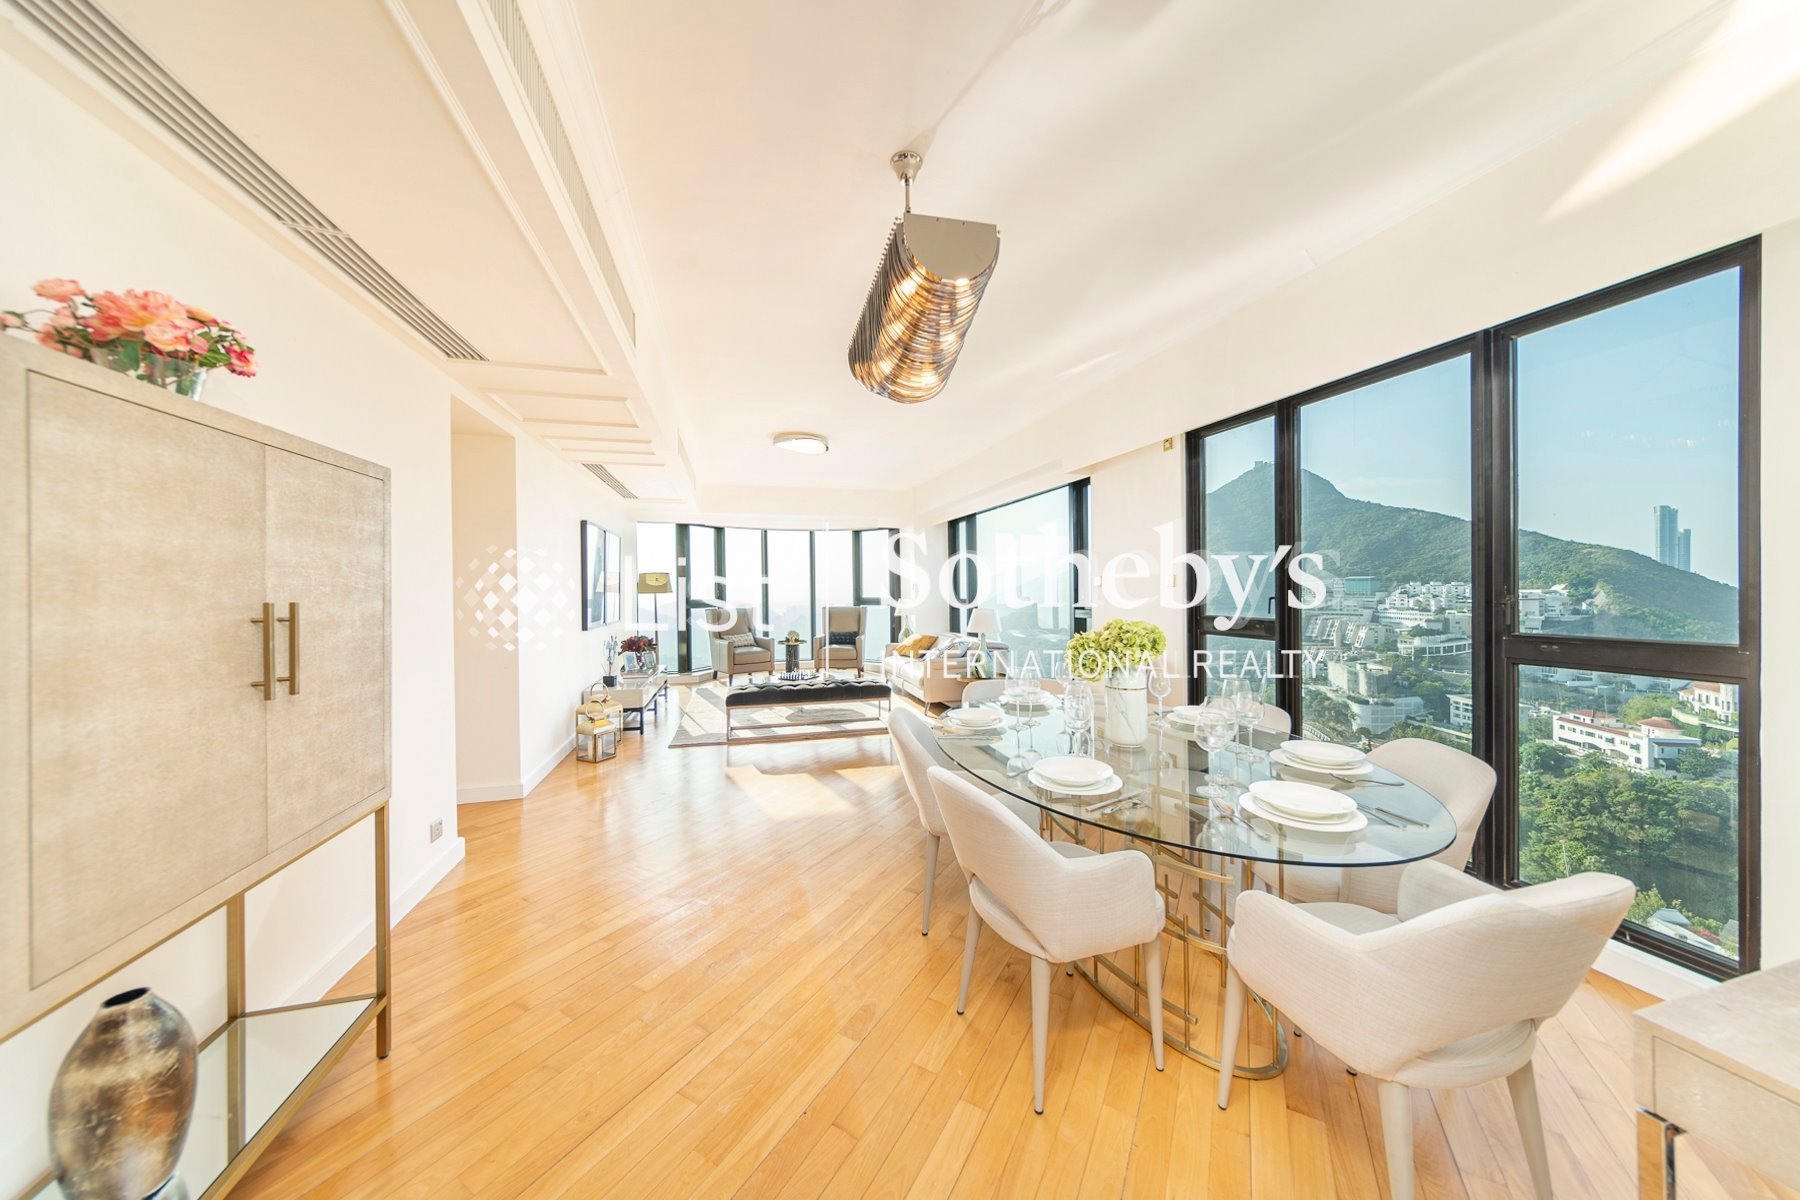 No. 3 Repulse Bay Road 淺水灣道3號 | Living and Dining Room